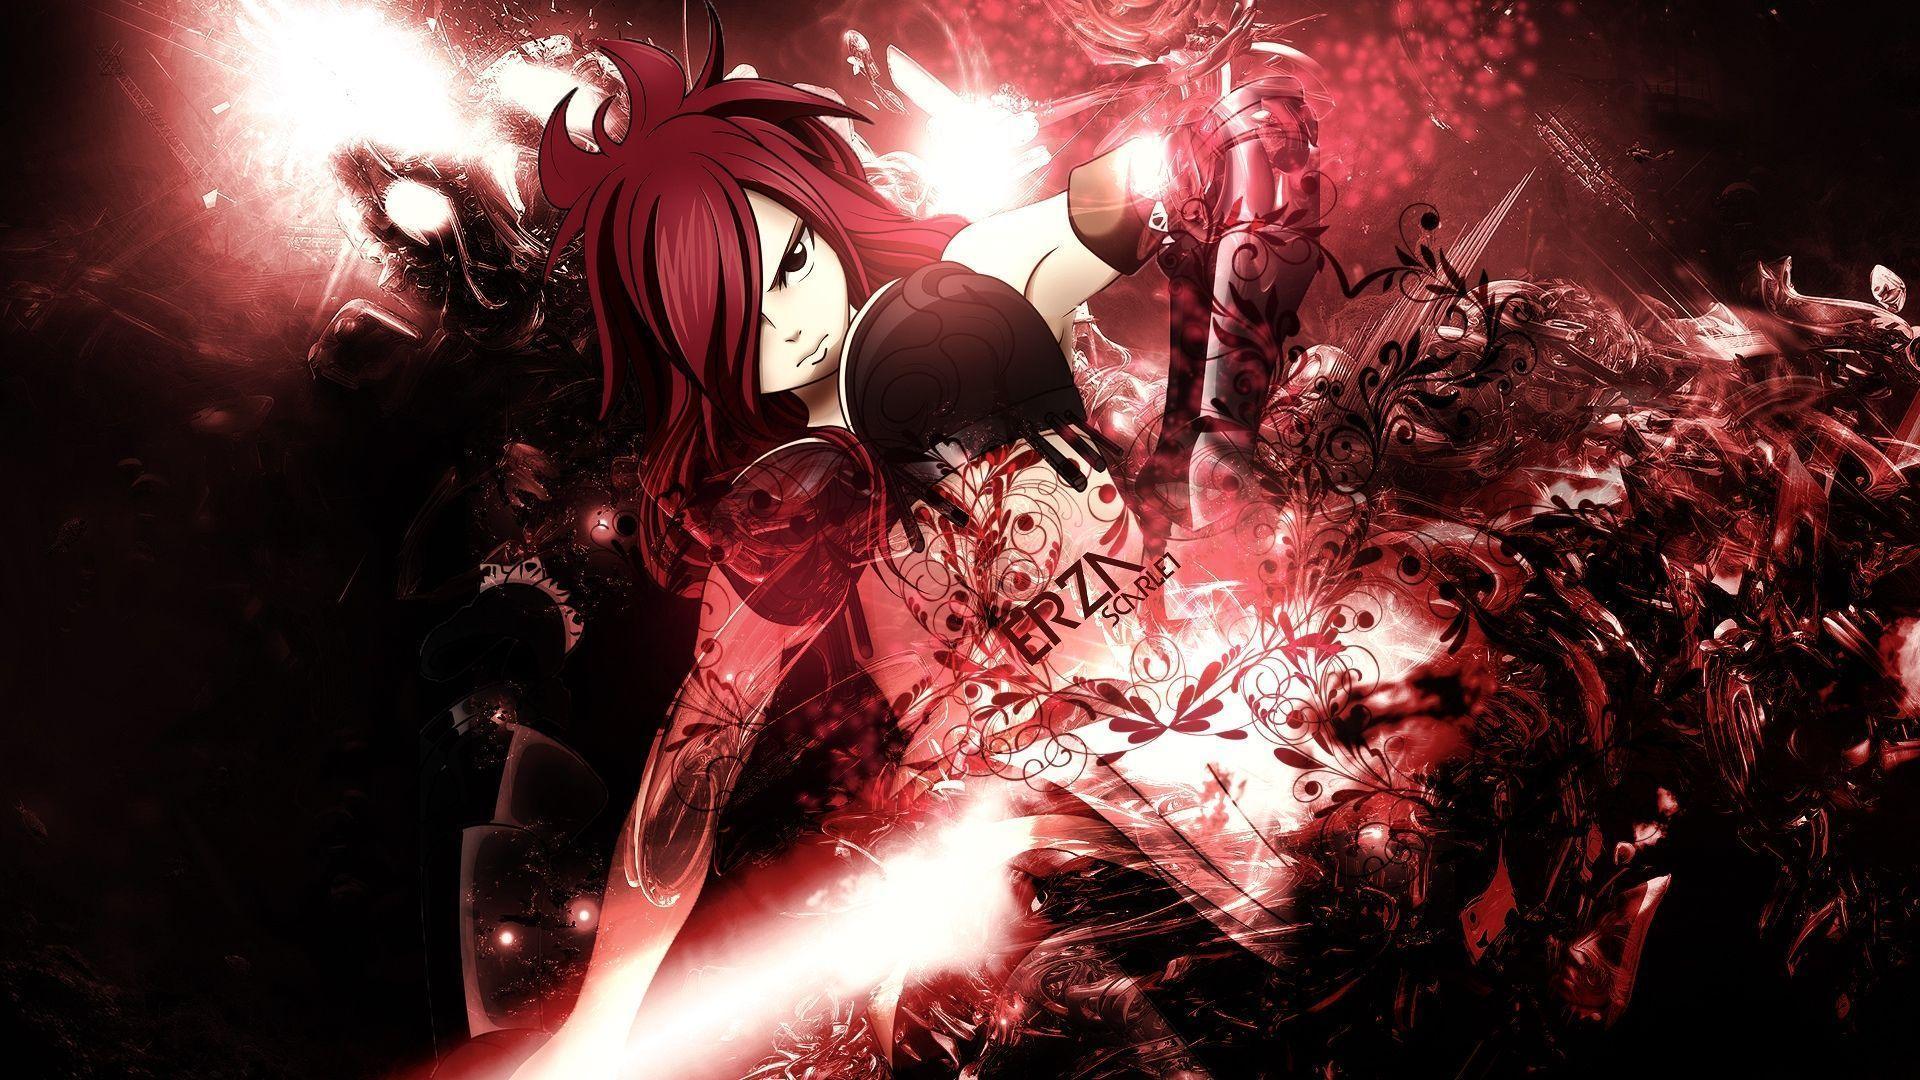 Wallpaper For > Fairy Tail Erza Wallpaper